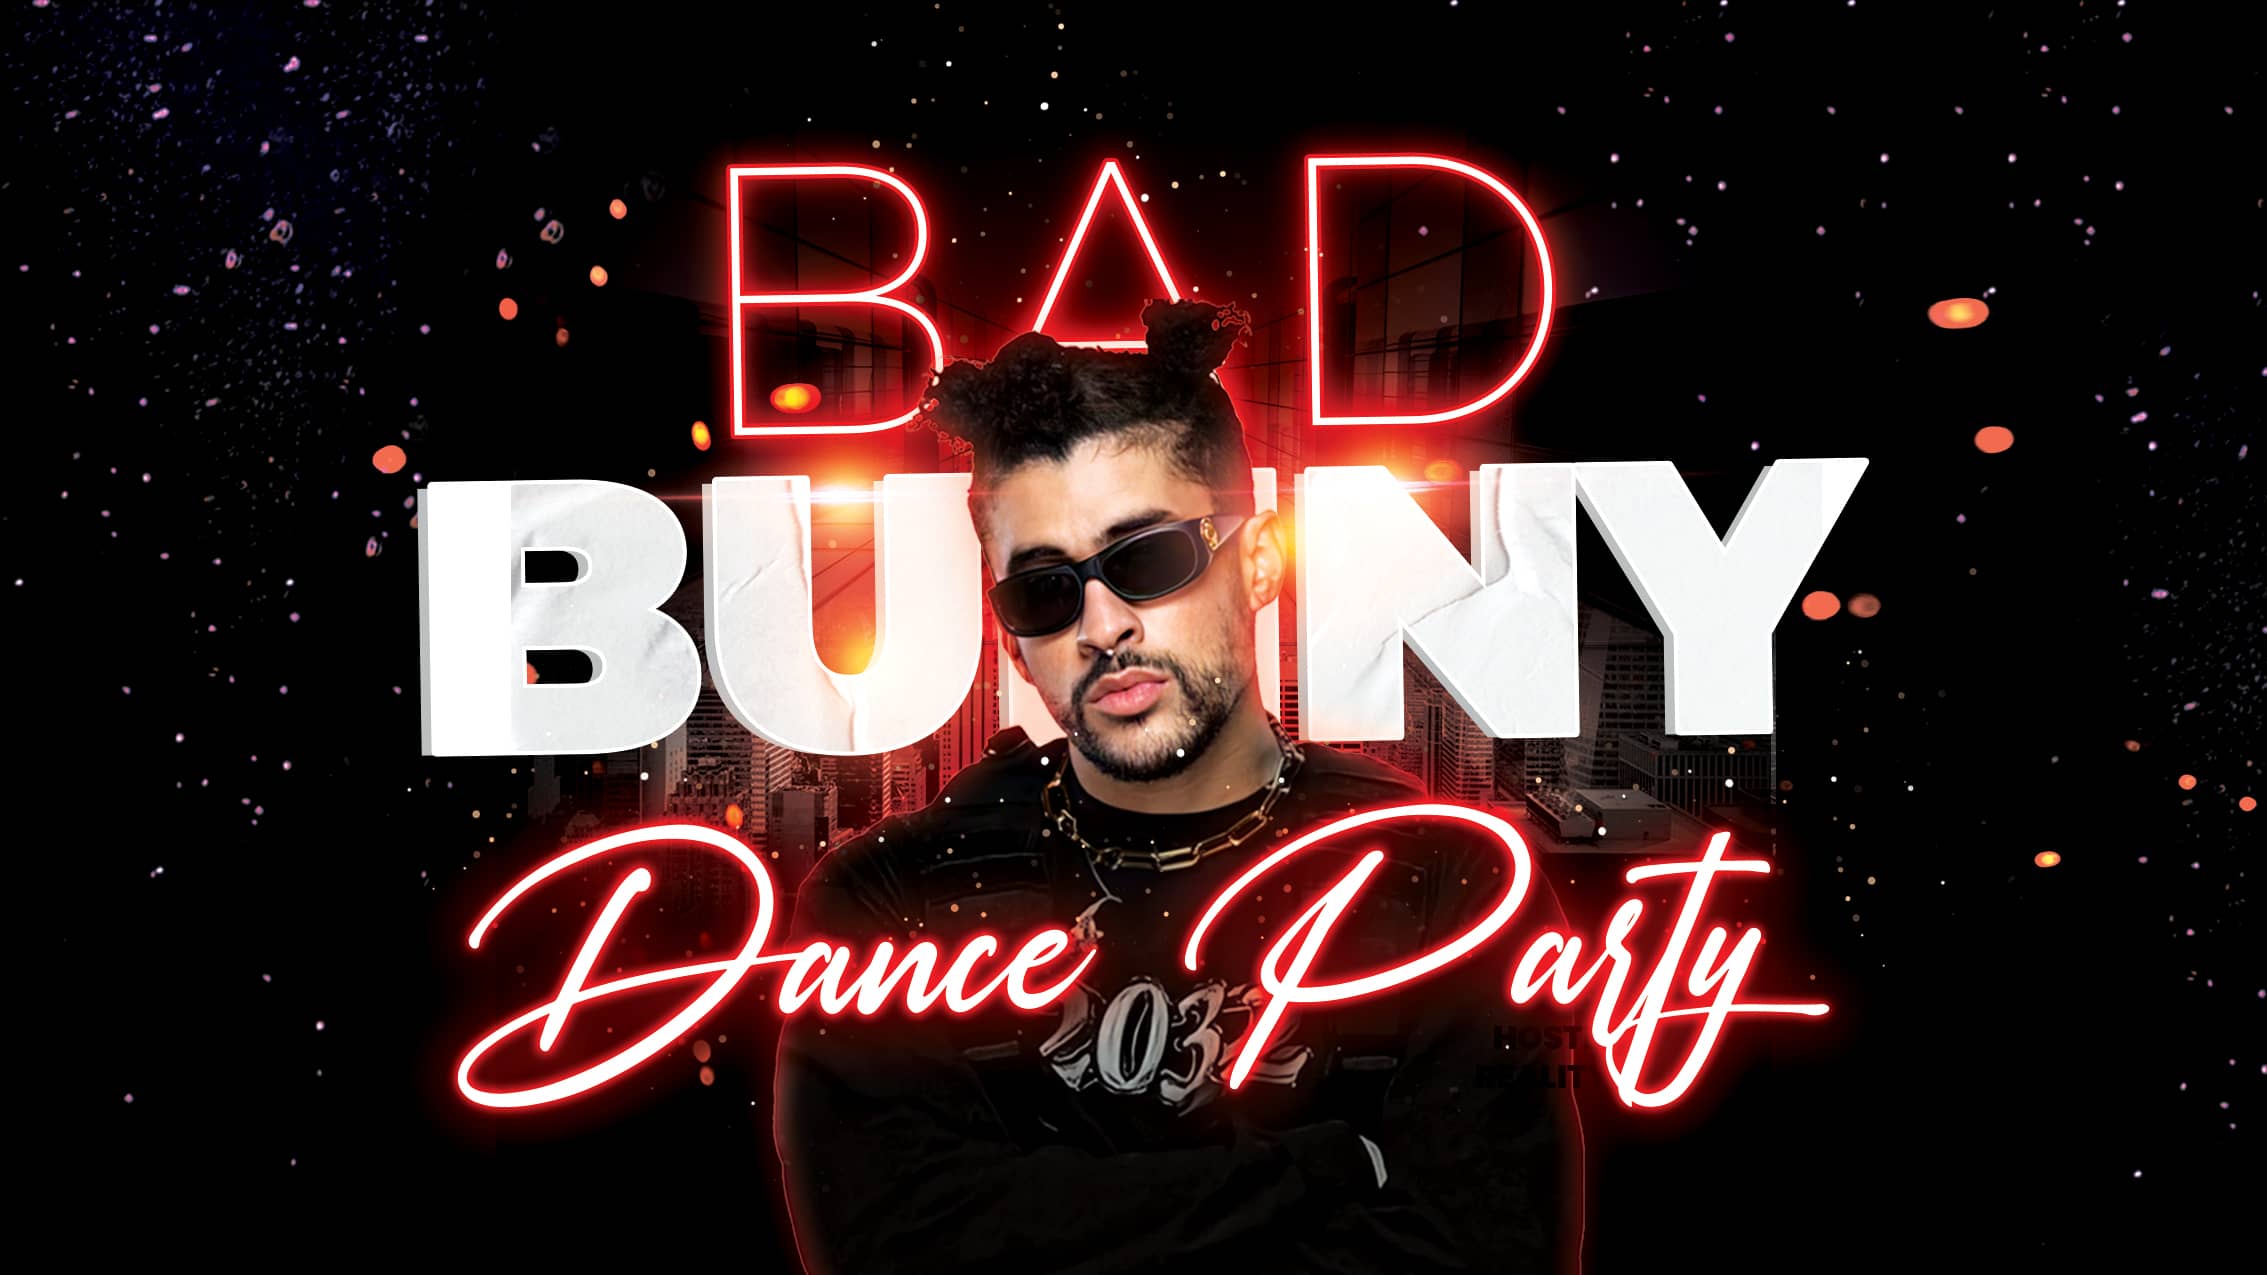 Poster for the Bad Bunny Dance Party on Saturday March 18th at 115 Bourbon St. in Merrionette Park, IL.